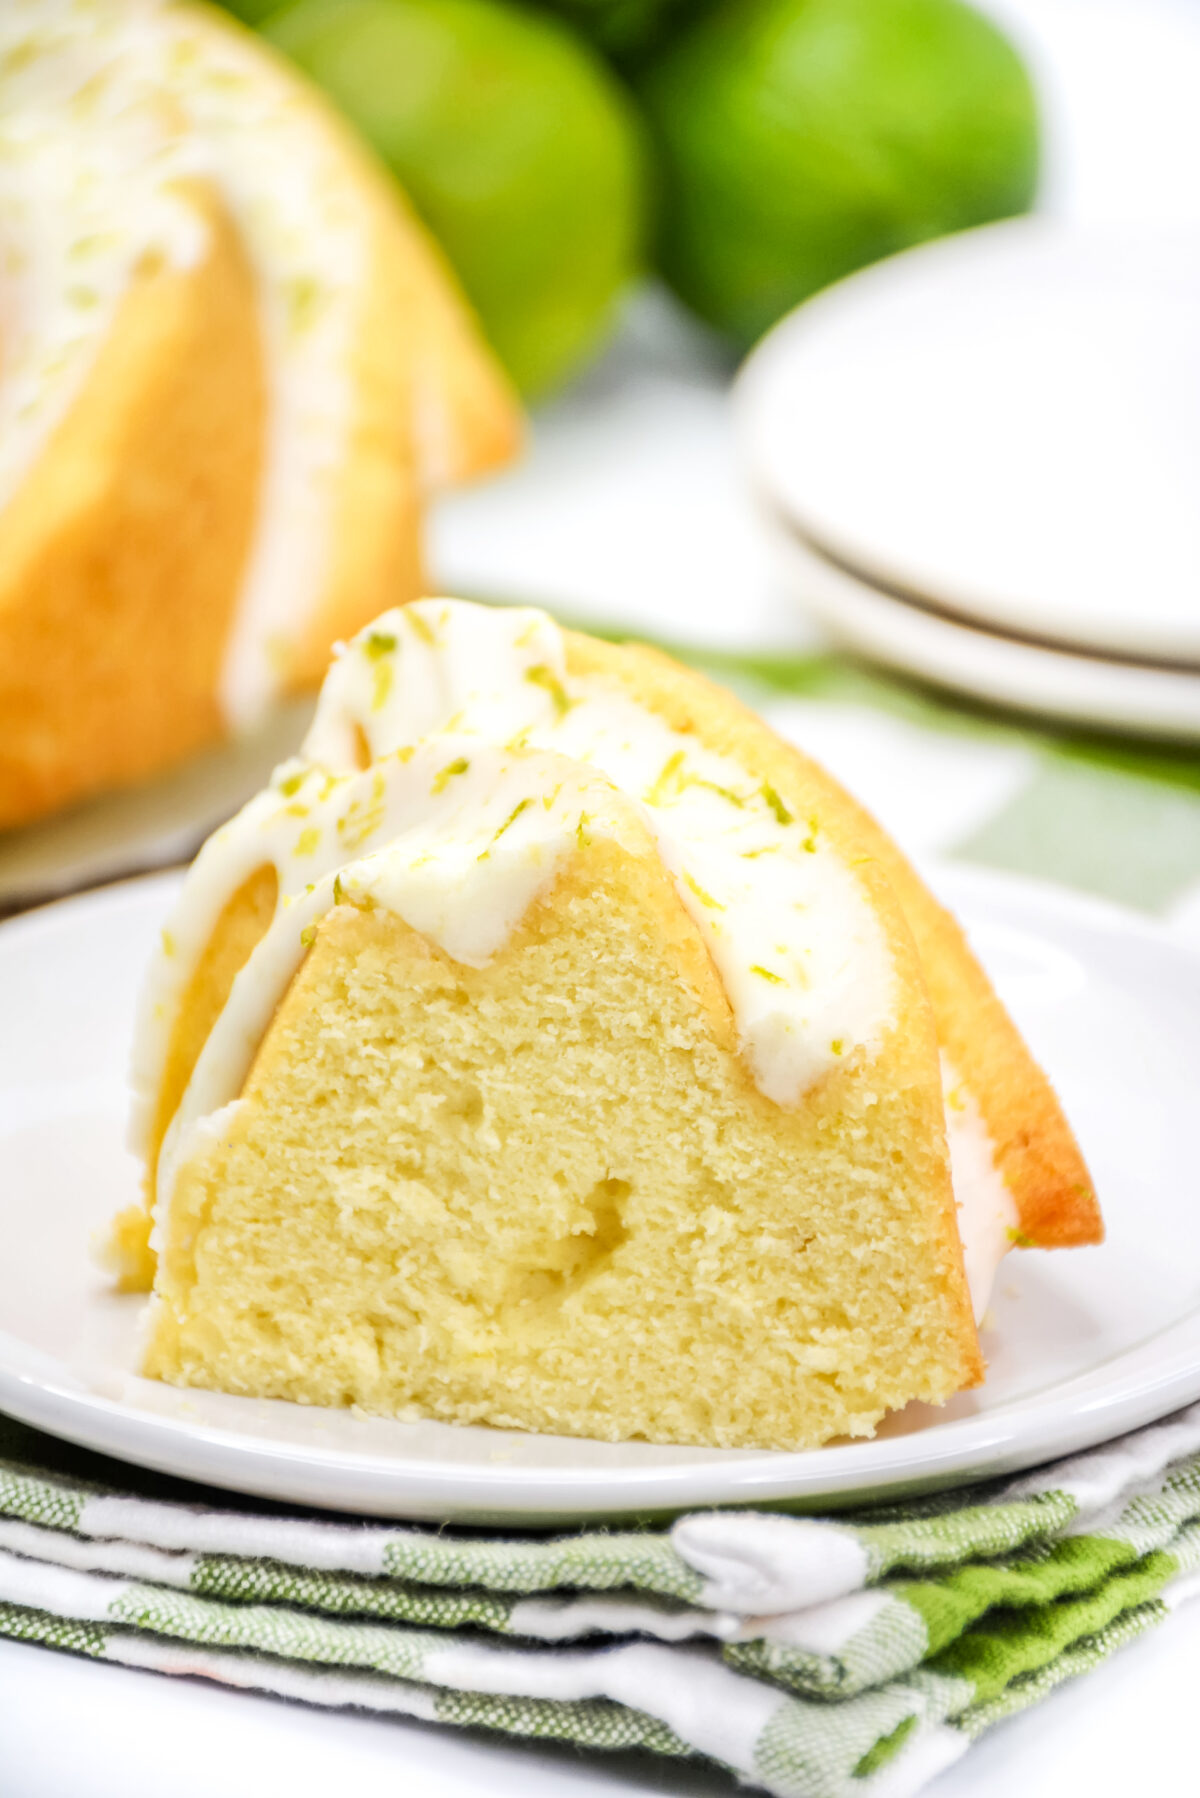 With fresh key limes and basic ingredients, you can make this tasty key lime bundt cake. It's the perfect summer dessert for any occasion!